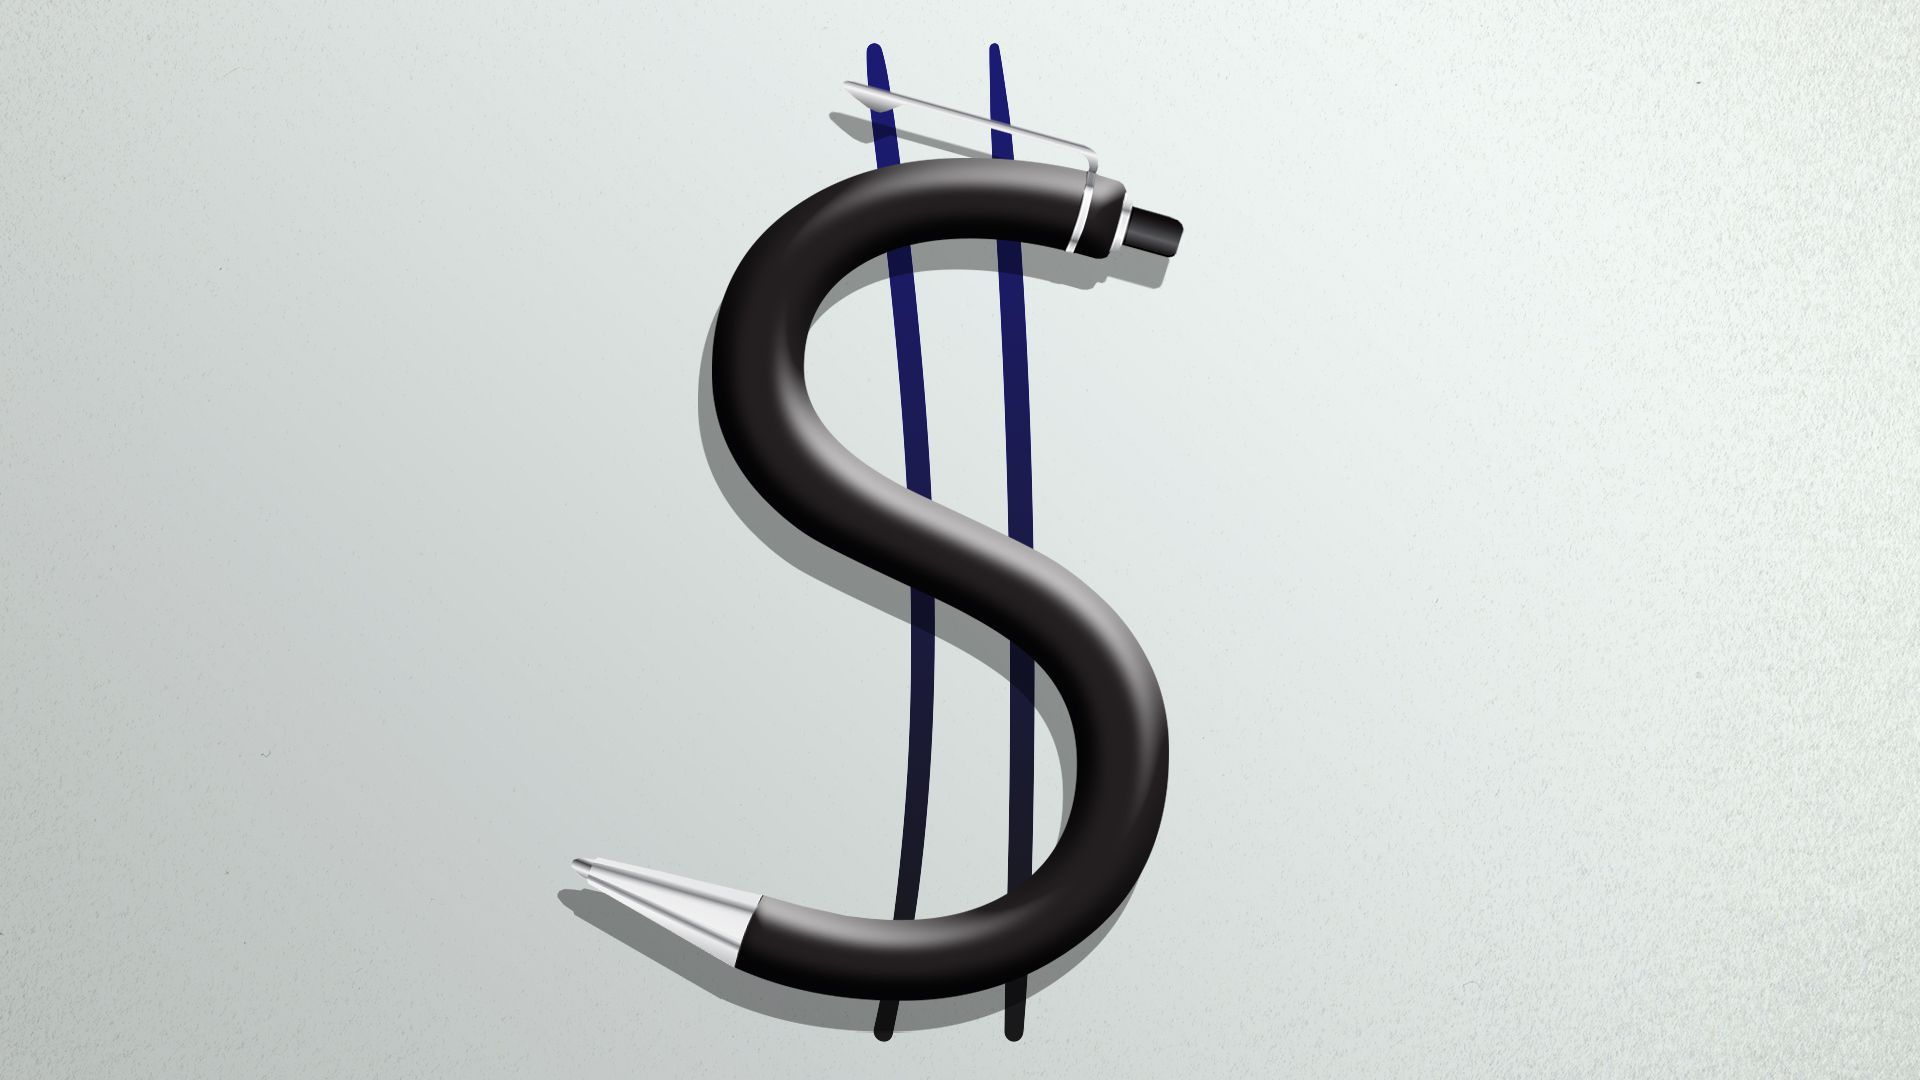 Illustration of a fountain pen and two ink lines twisted into a dollar sign shape